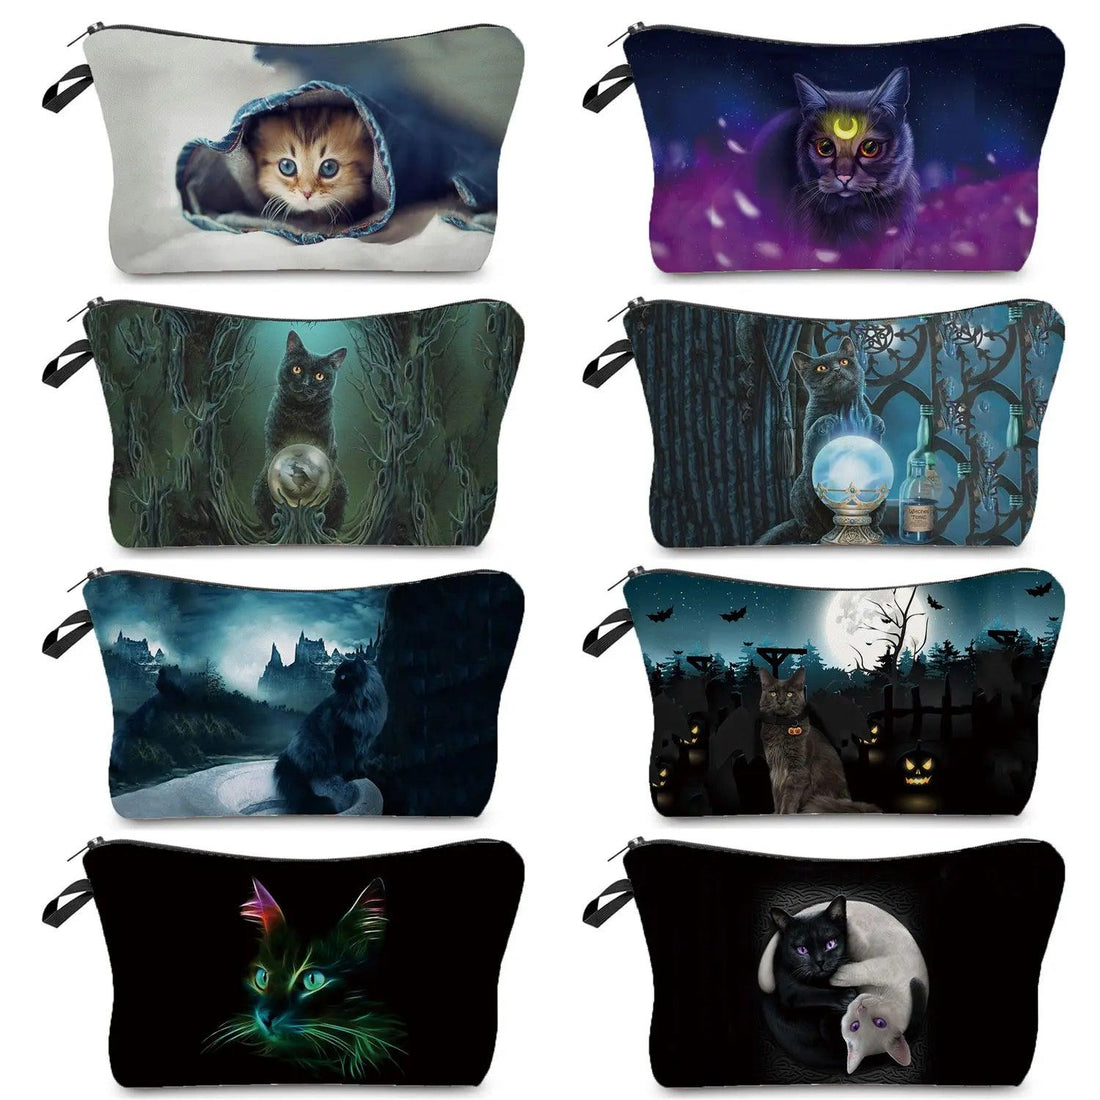 Dark Gothic Cat printed Travel Pouch/Cosmetic Bag, 23 Designs - Just Cats - Gifts for Cat Lovers